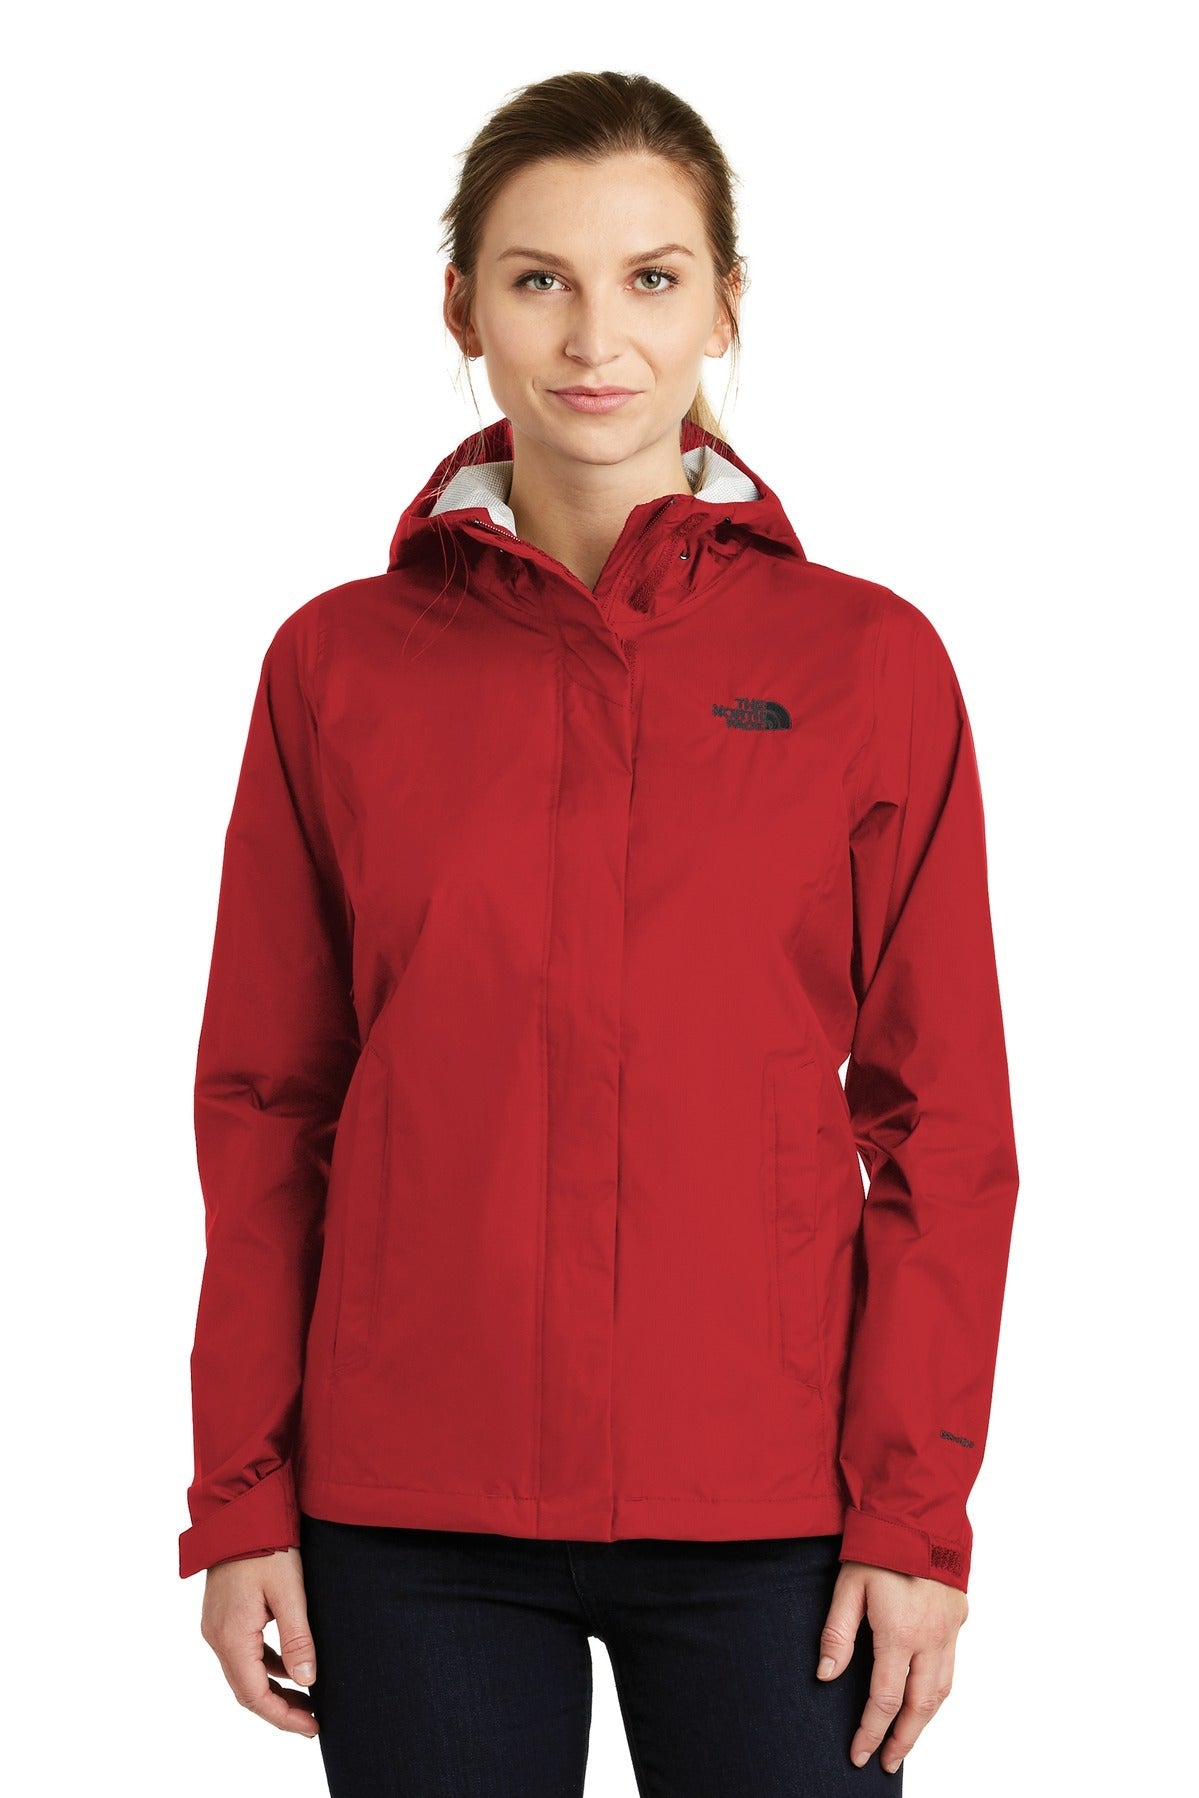 The North Face ® Ladies DryVent™ Rain Jacket. NF0A3LH5 - DFW Impression